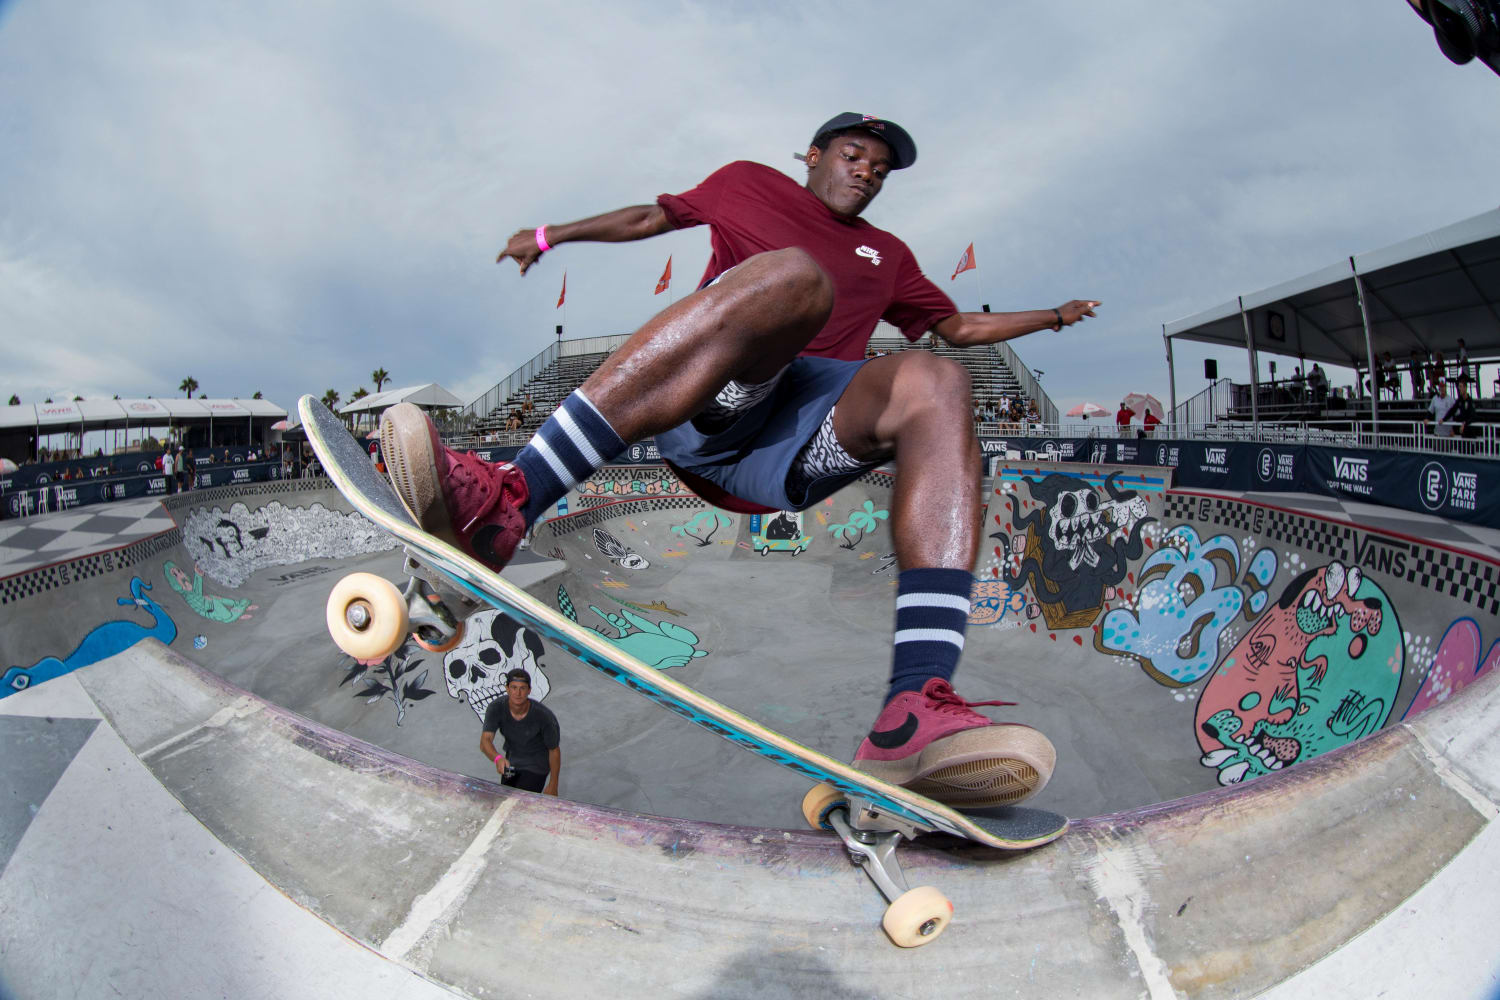 Zion Wright skates during a skateboarding competition.